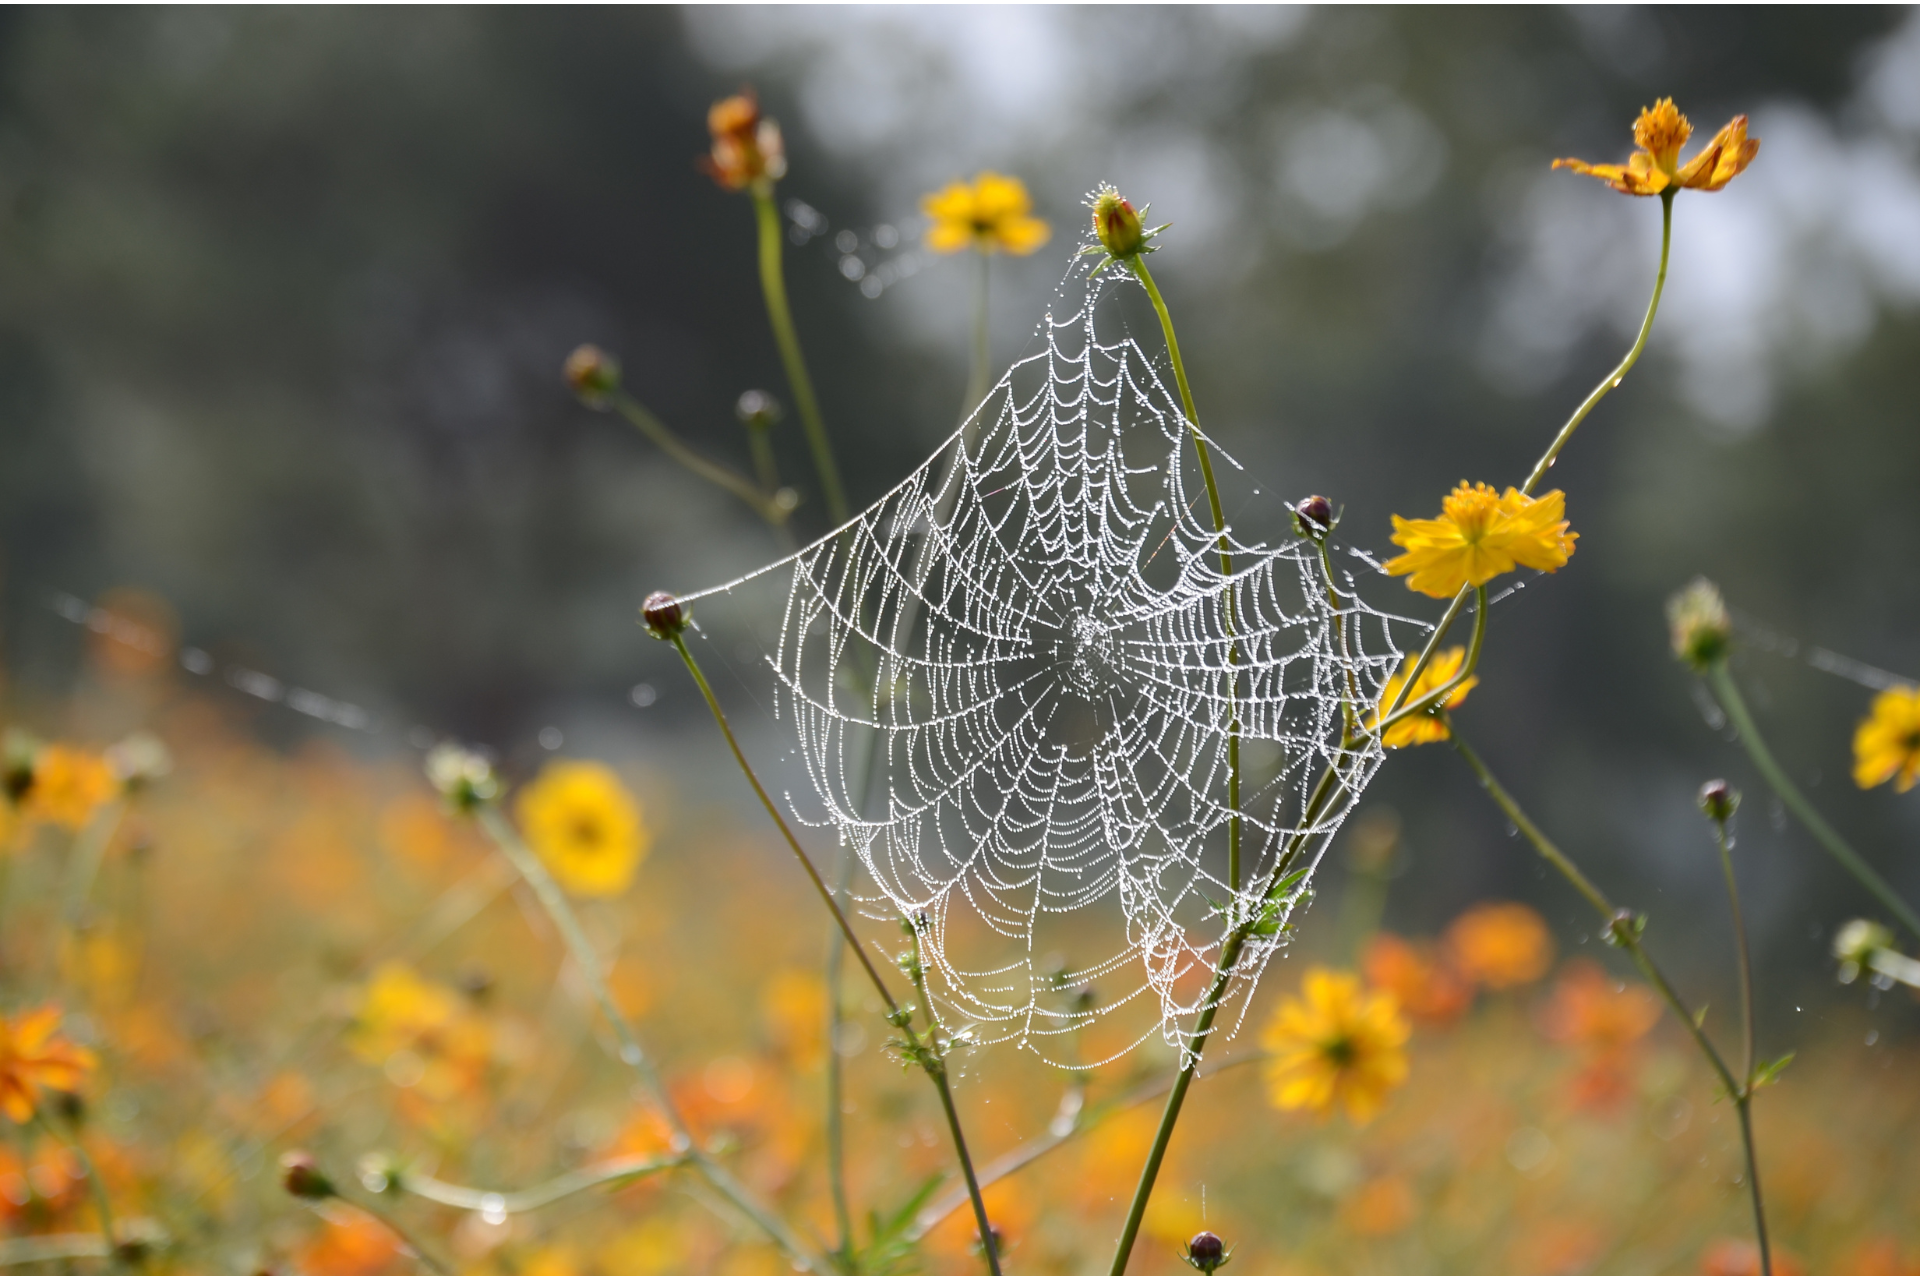 A spider web in a field of yellow flowers